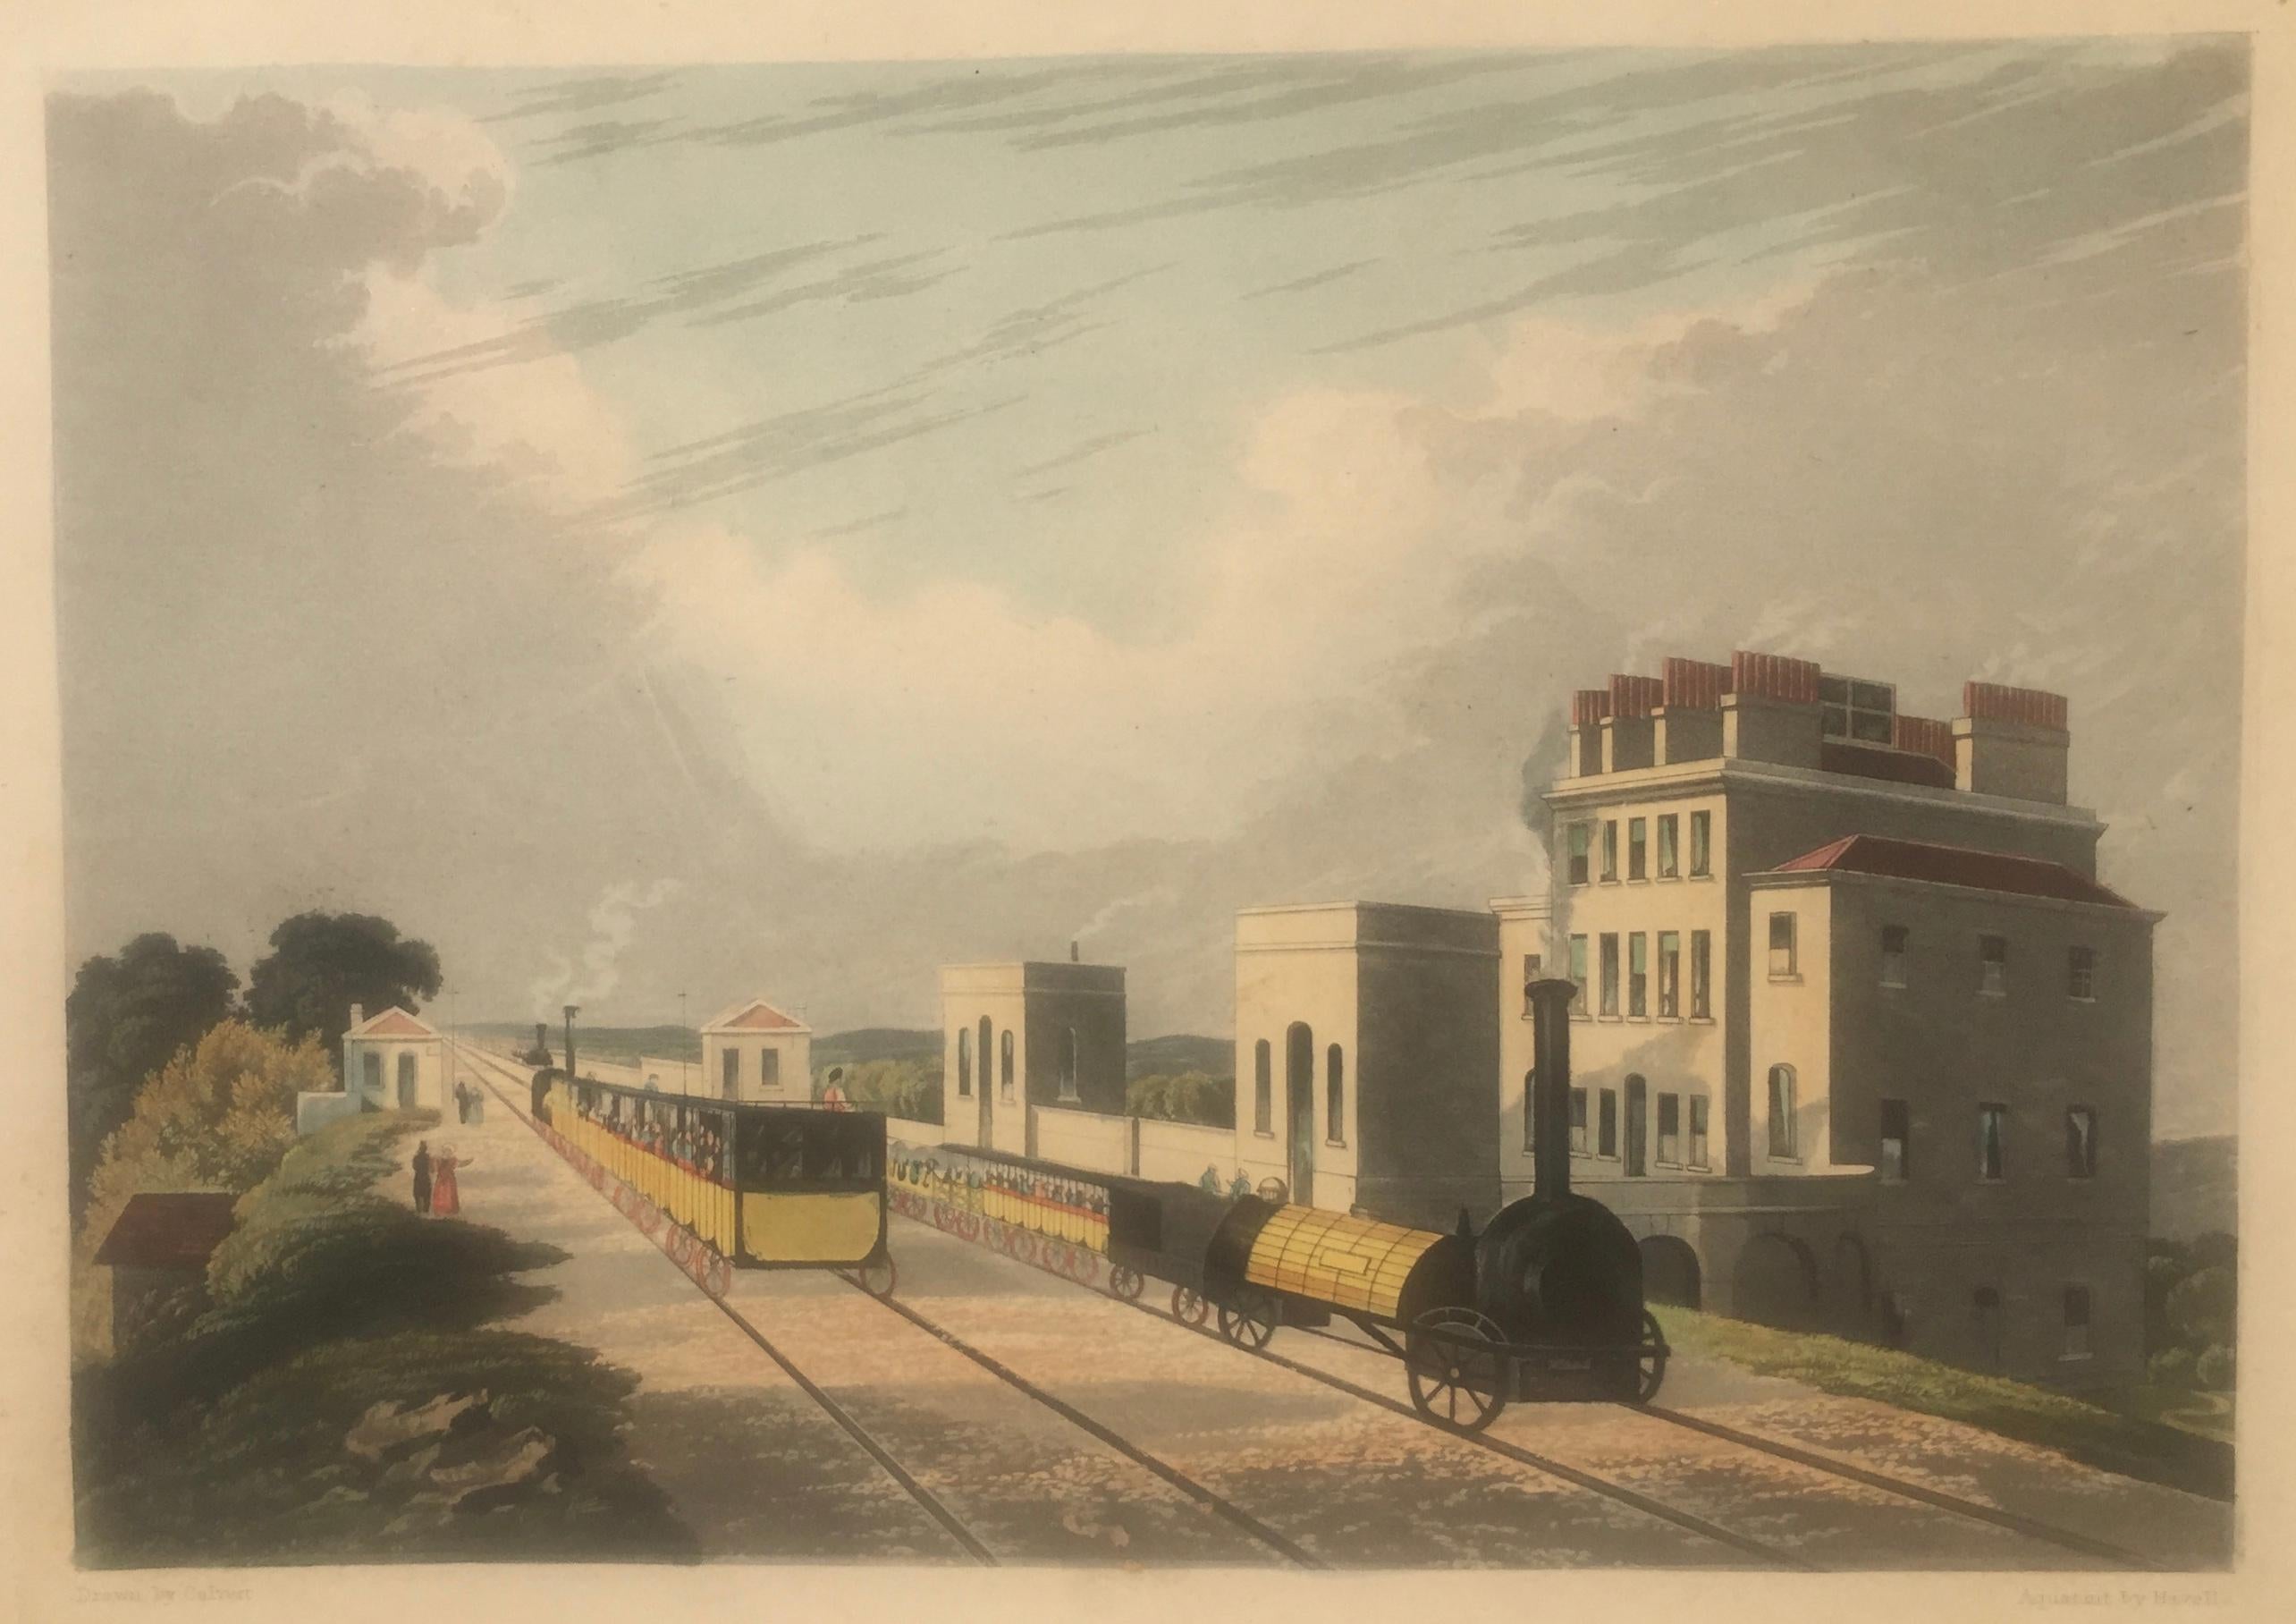 Robert  Havell, Jr. Print - View of the Manchester & Liverpool Railway. Taken at Newton. 1825